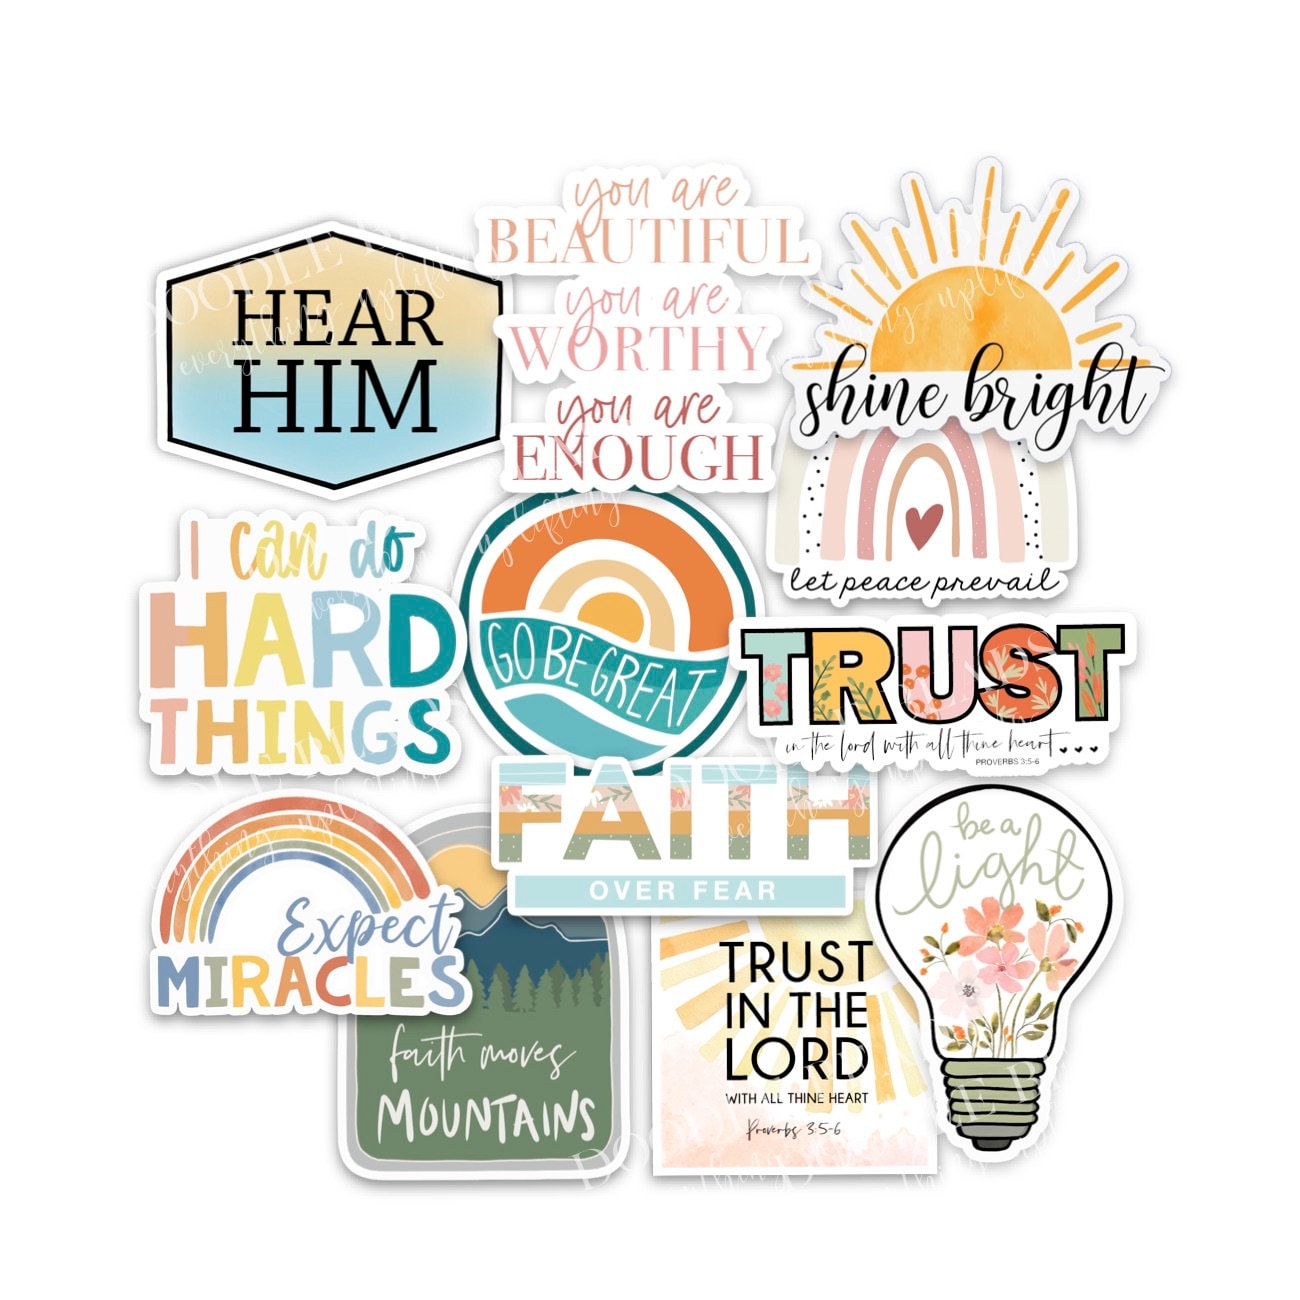 2023 LDS Youth Theme Sticker style 004, I Can Do All Things Through Christ,  STICKERS, Decals, YW Theme, Gifts, Missionary Stickers 